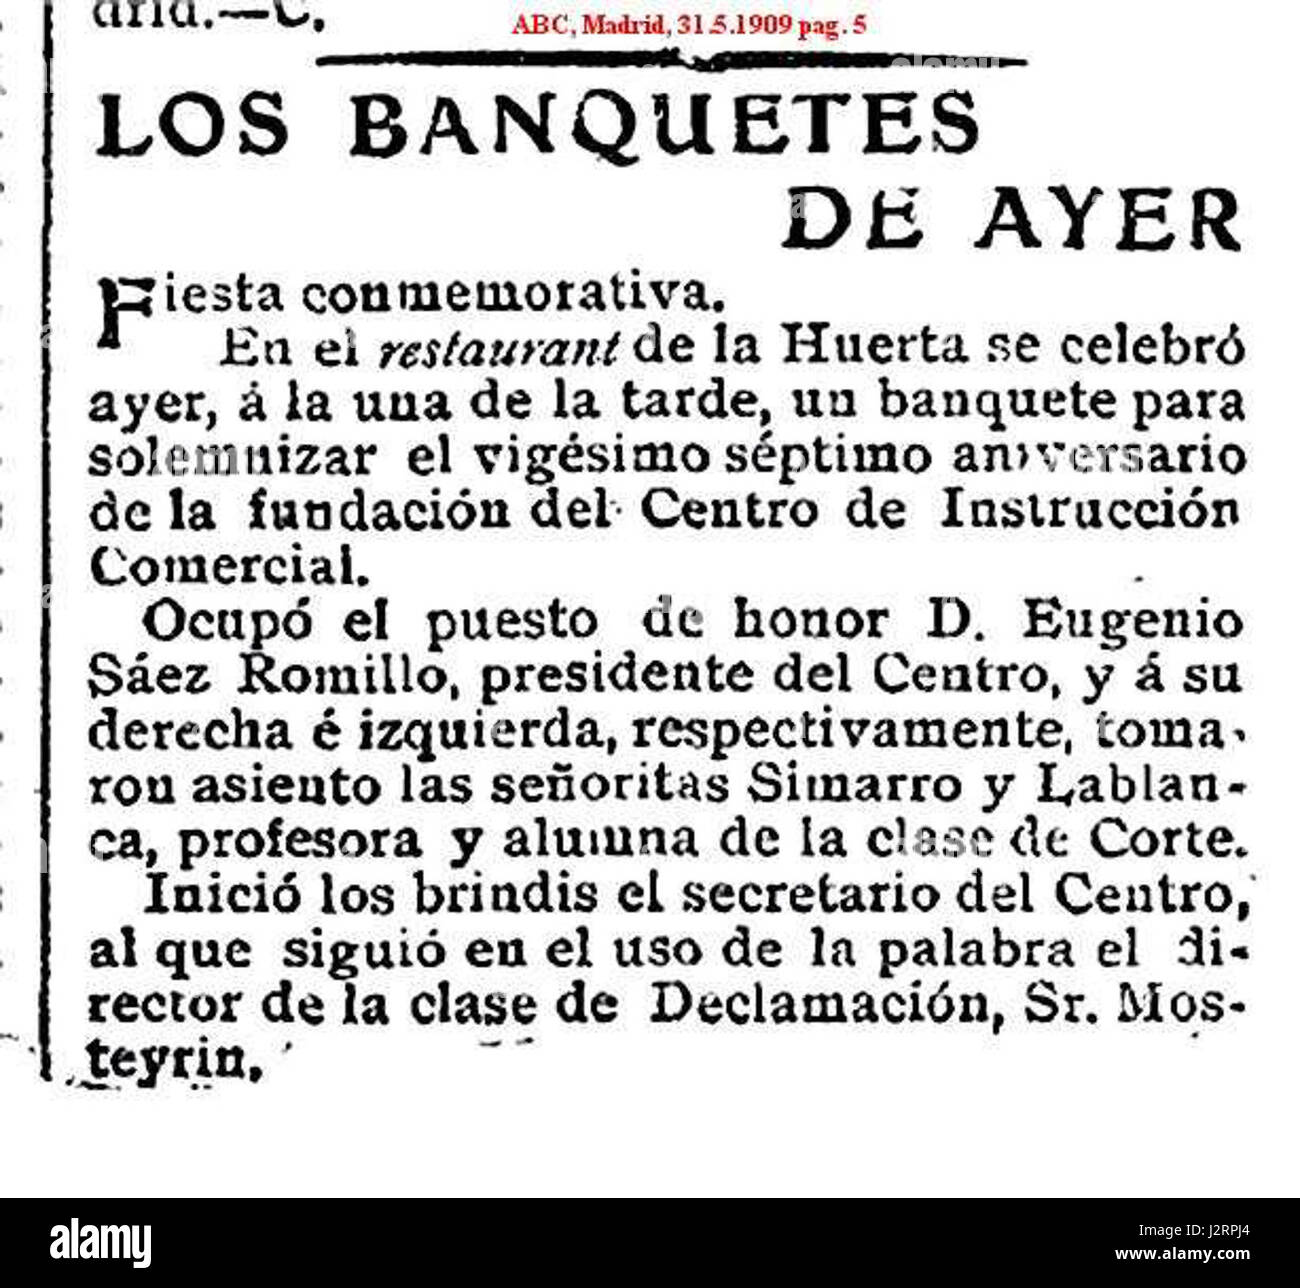 1909 - Yesterday, at one in the afternoon, a banquet was held at the Huerta restaurant to celebrate the twenty-seventh anniversary of the founding of the Commercial Instruction Center. Mr. Eugenio Sainz Romillo, president of the Center, took the place of honor, and to his right and left, respectively, Miss Simarro and Lablanca, teacher and student of the Court class, took their seats. Stock Photo